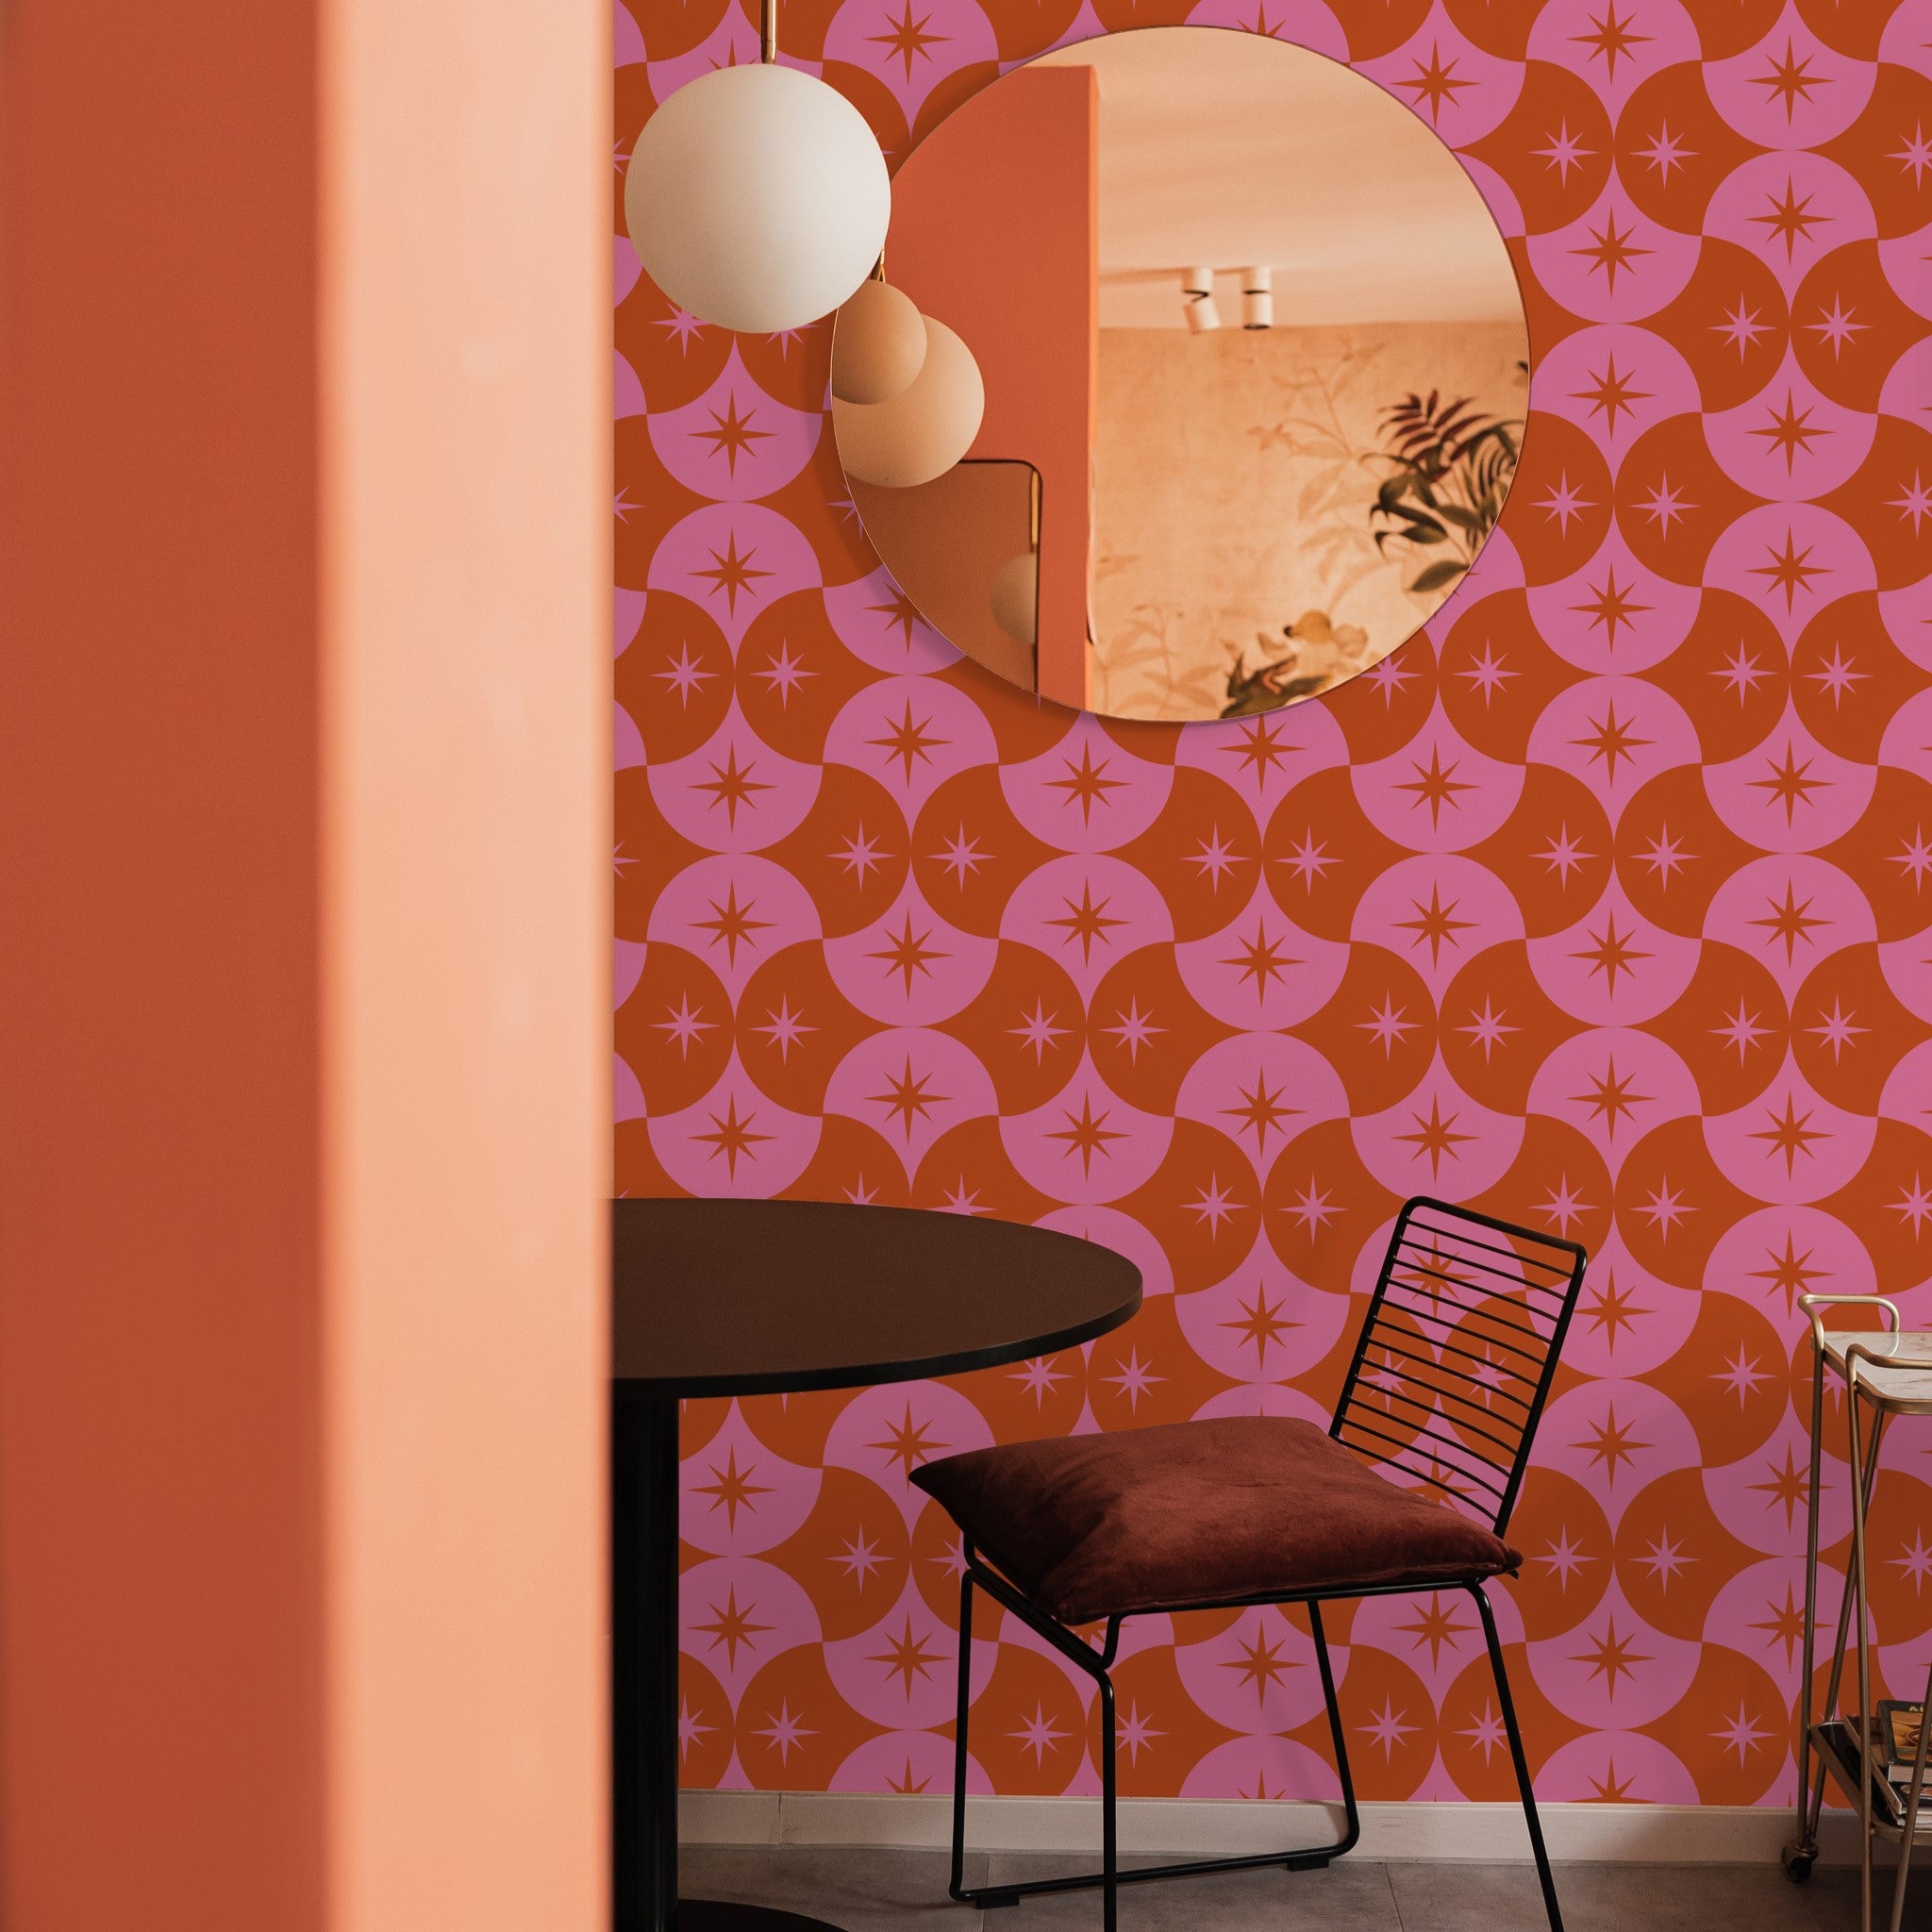 Alt text: "Margot Wallpaper by Wall Blush featured in stylish modern living room, highlighting vibrant patterned wall decor."